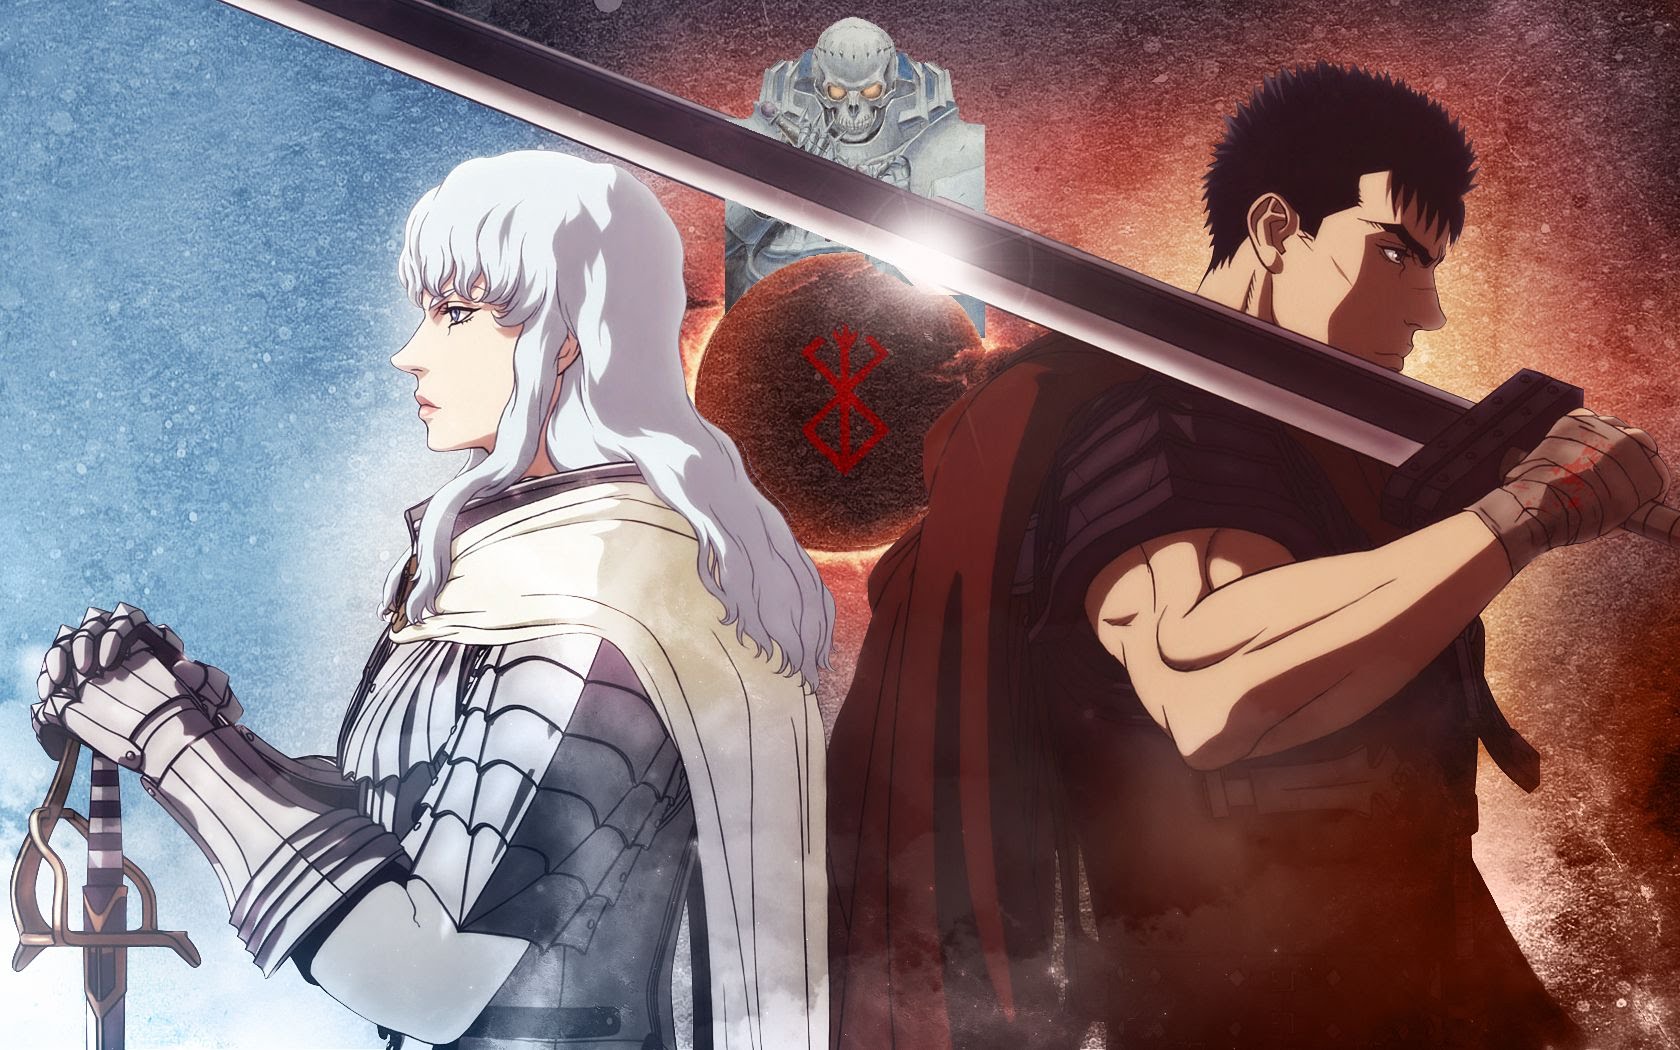 Anime – THE BAND OF THE HAWK – BERSERK PROJECT